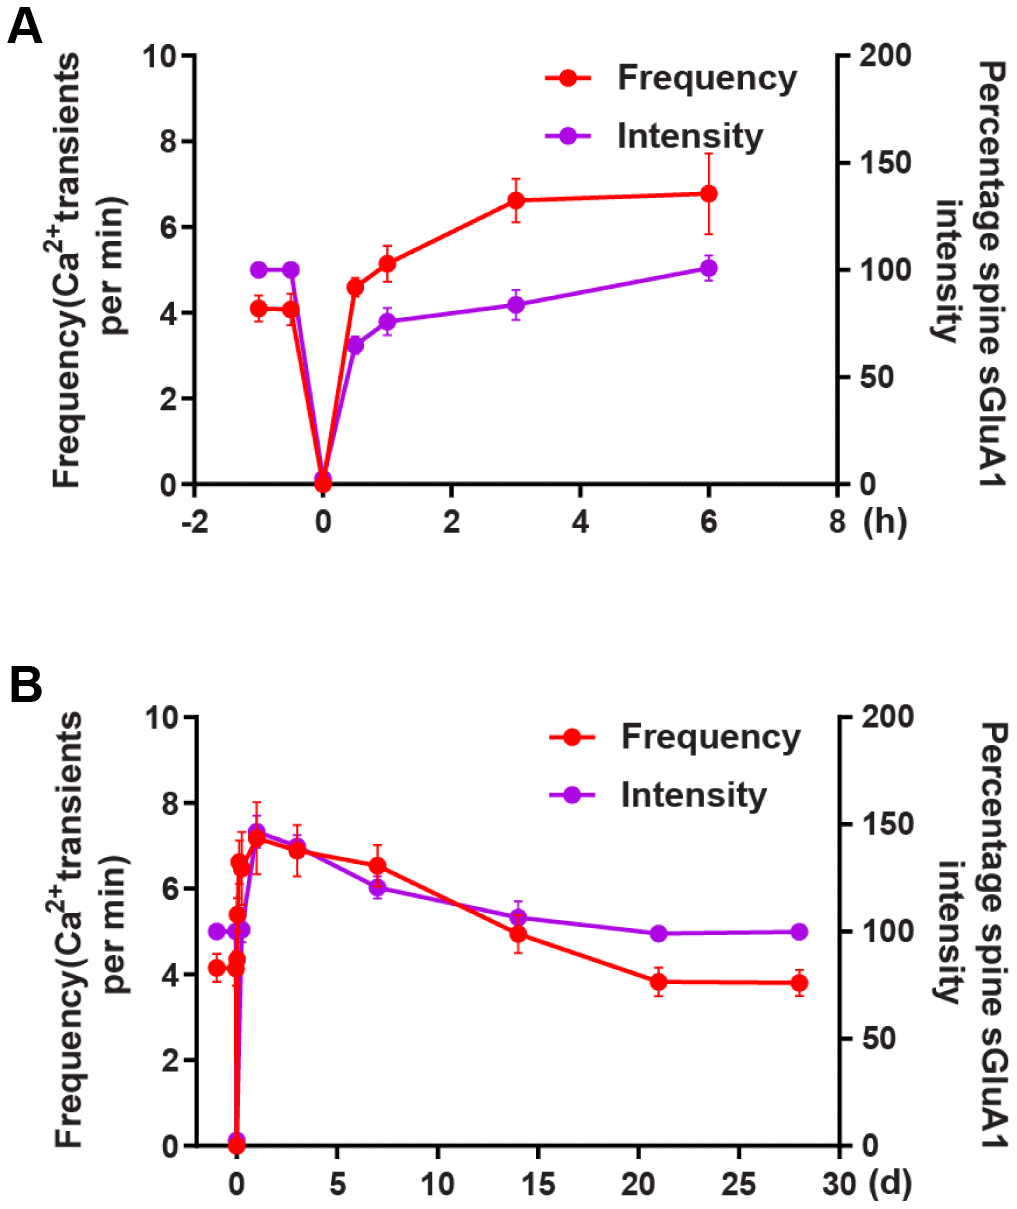 The correlation between changes in Ca2+ transients and changes in AMPAR intensity after transient global ischemia-reperfusion. (A) The overall trend of the average frequency of Ca2+ transients and the Spine sGluA1 intensity (SEP-GluA1 signal) before and after 6 hours of ischemia-reperfusion. (B) The overall trend of the average frequency of Ca2+ transients and the Spine sGluA1 intensity (SEP-GluA1 signal) before and after 28 days of ischemia-reperfusion.